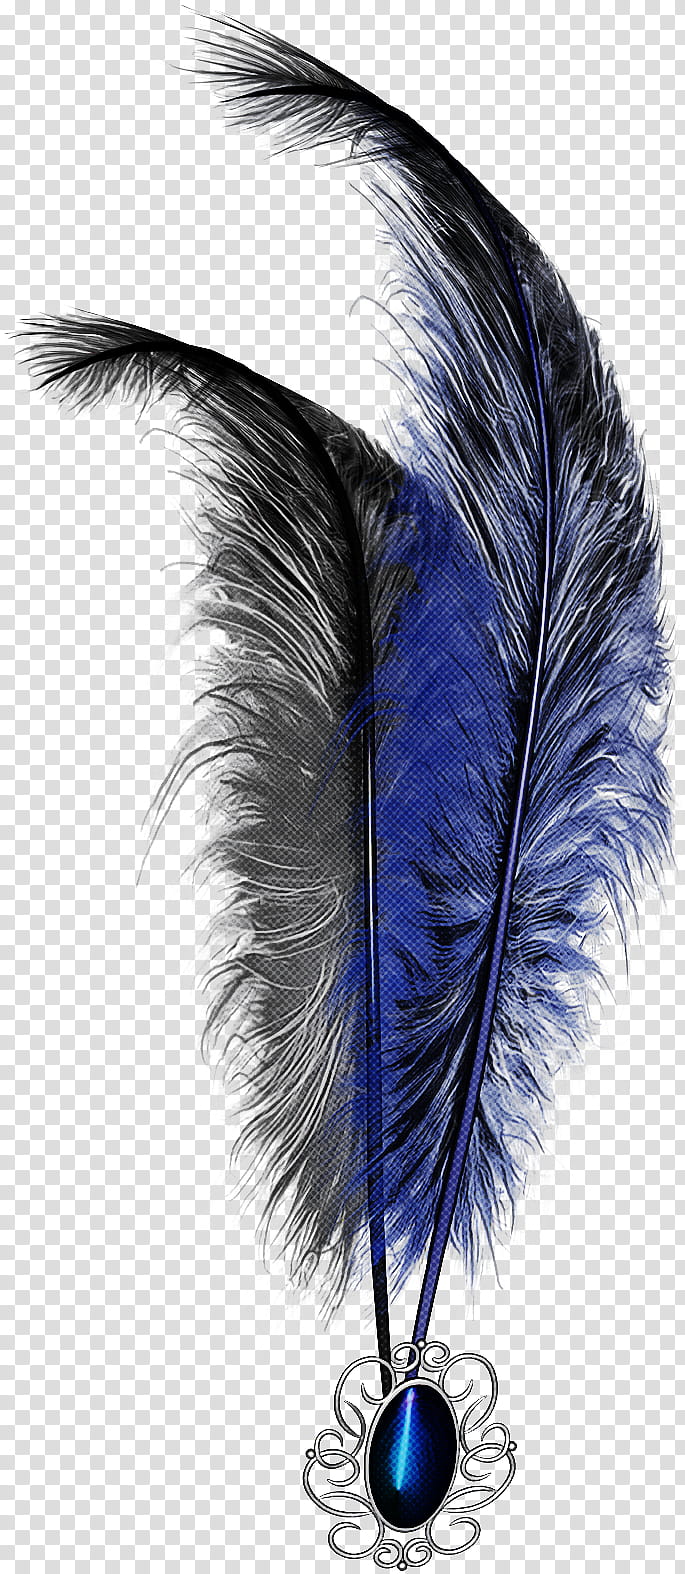 Feather, Quill, Pen, Wing, Purple, Writing Implement, Electric Blue, Natural Material transparent background PNG clipart